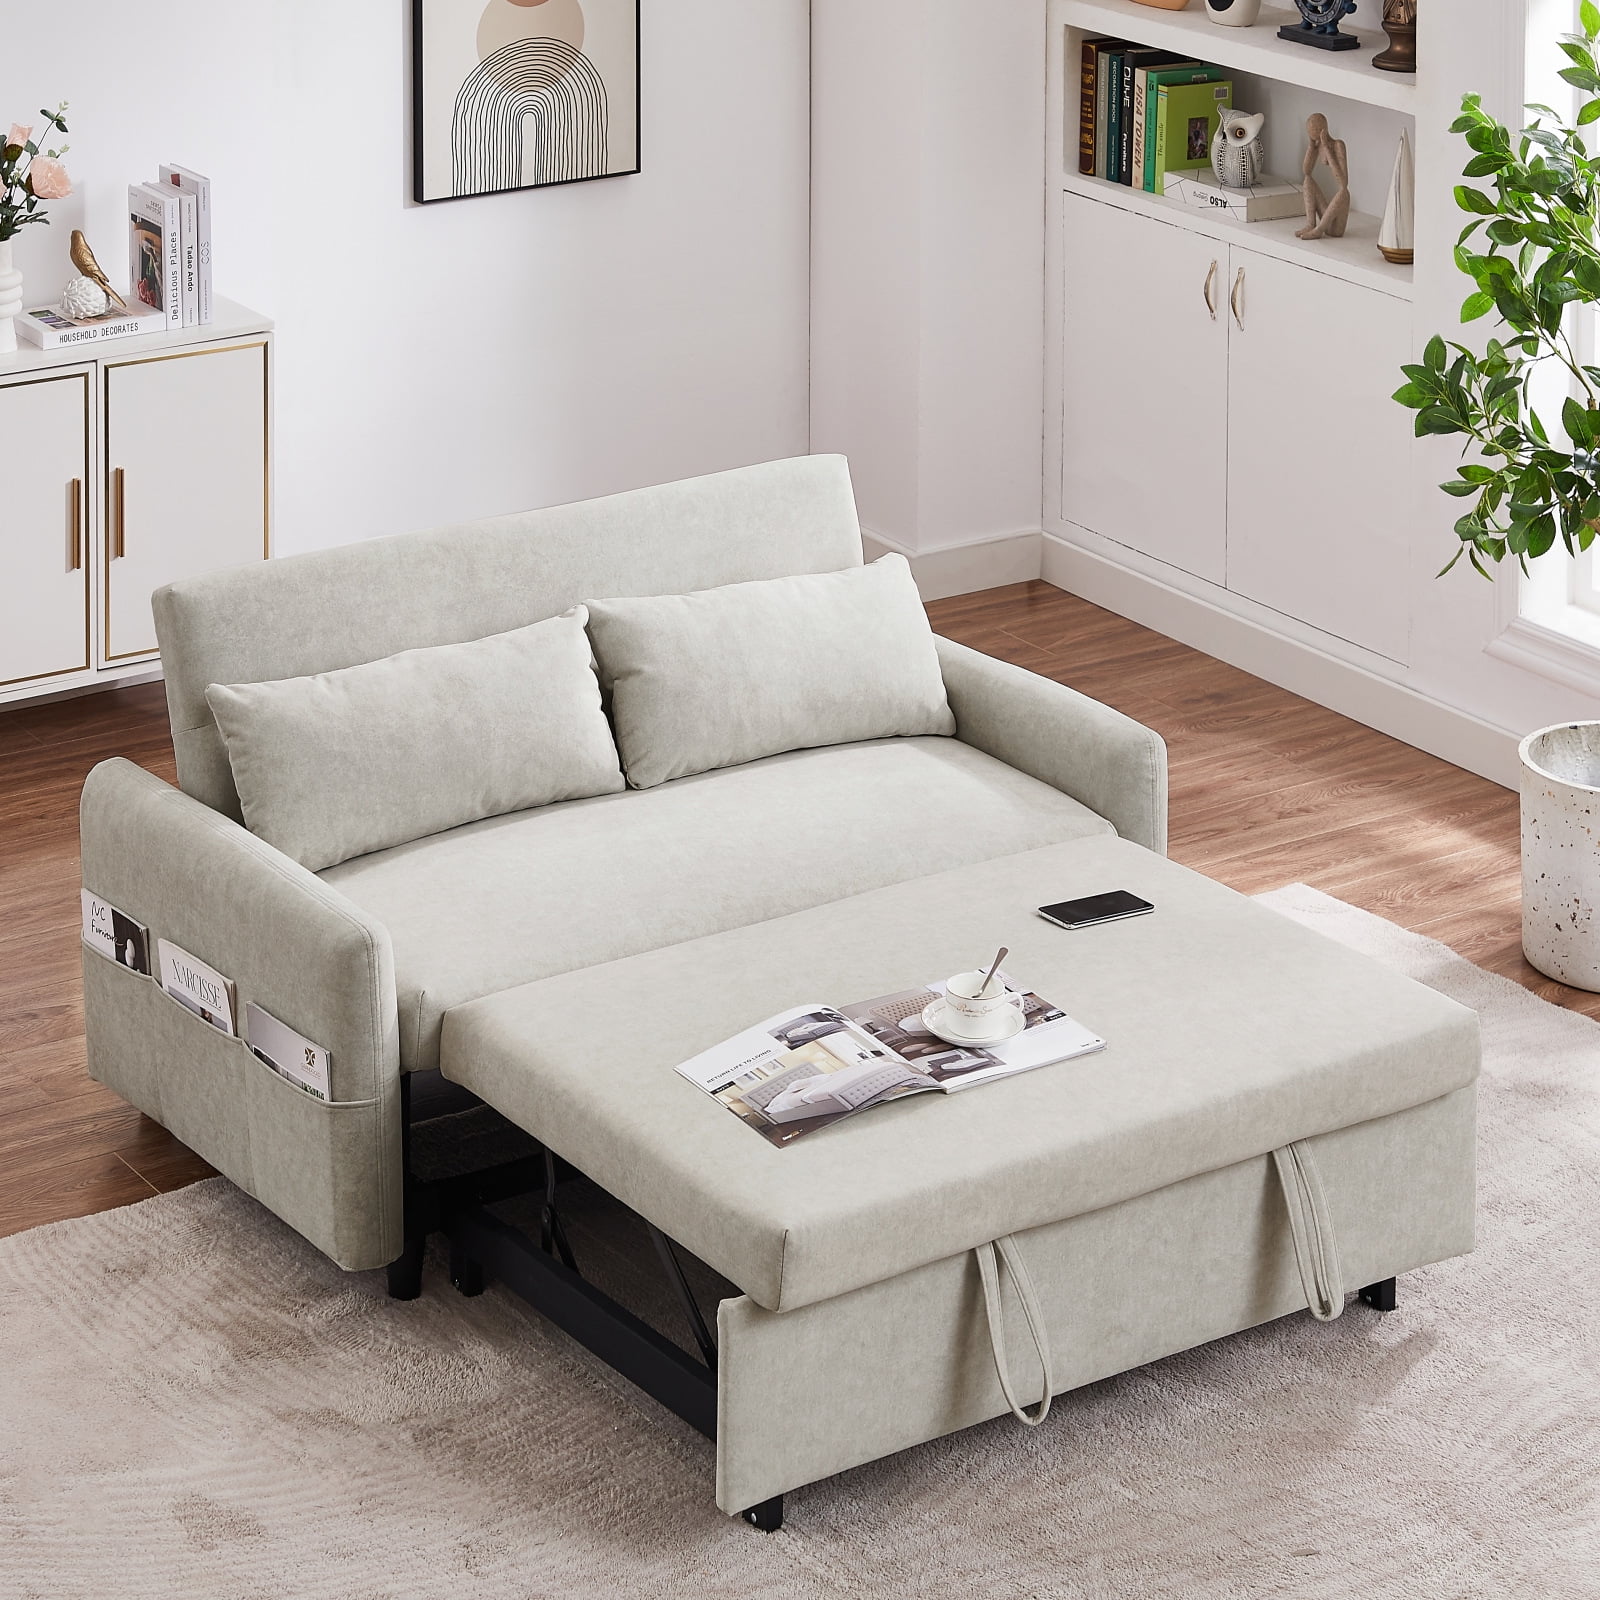 Sofa Bed Pull Out Couch, Convertible Loveseat Sleeper Sofa Couch with ...